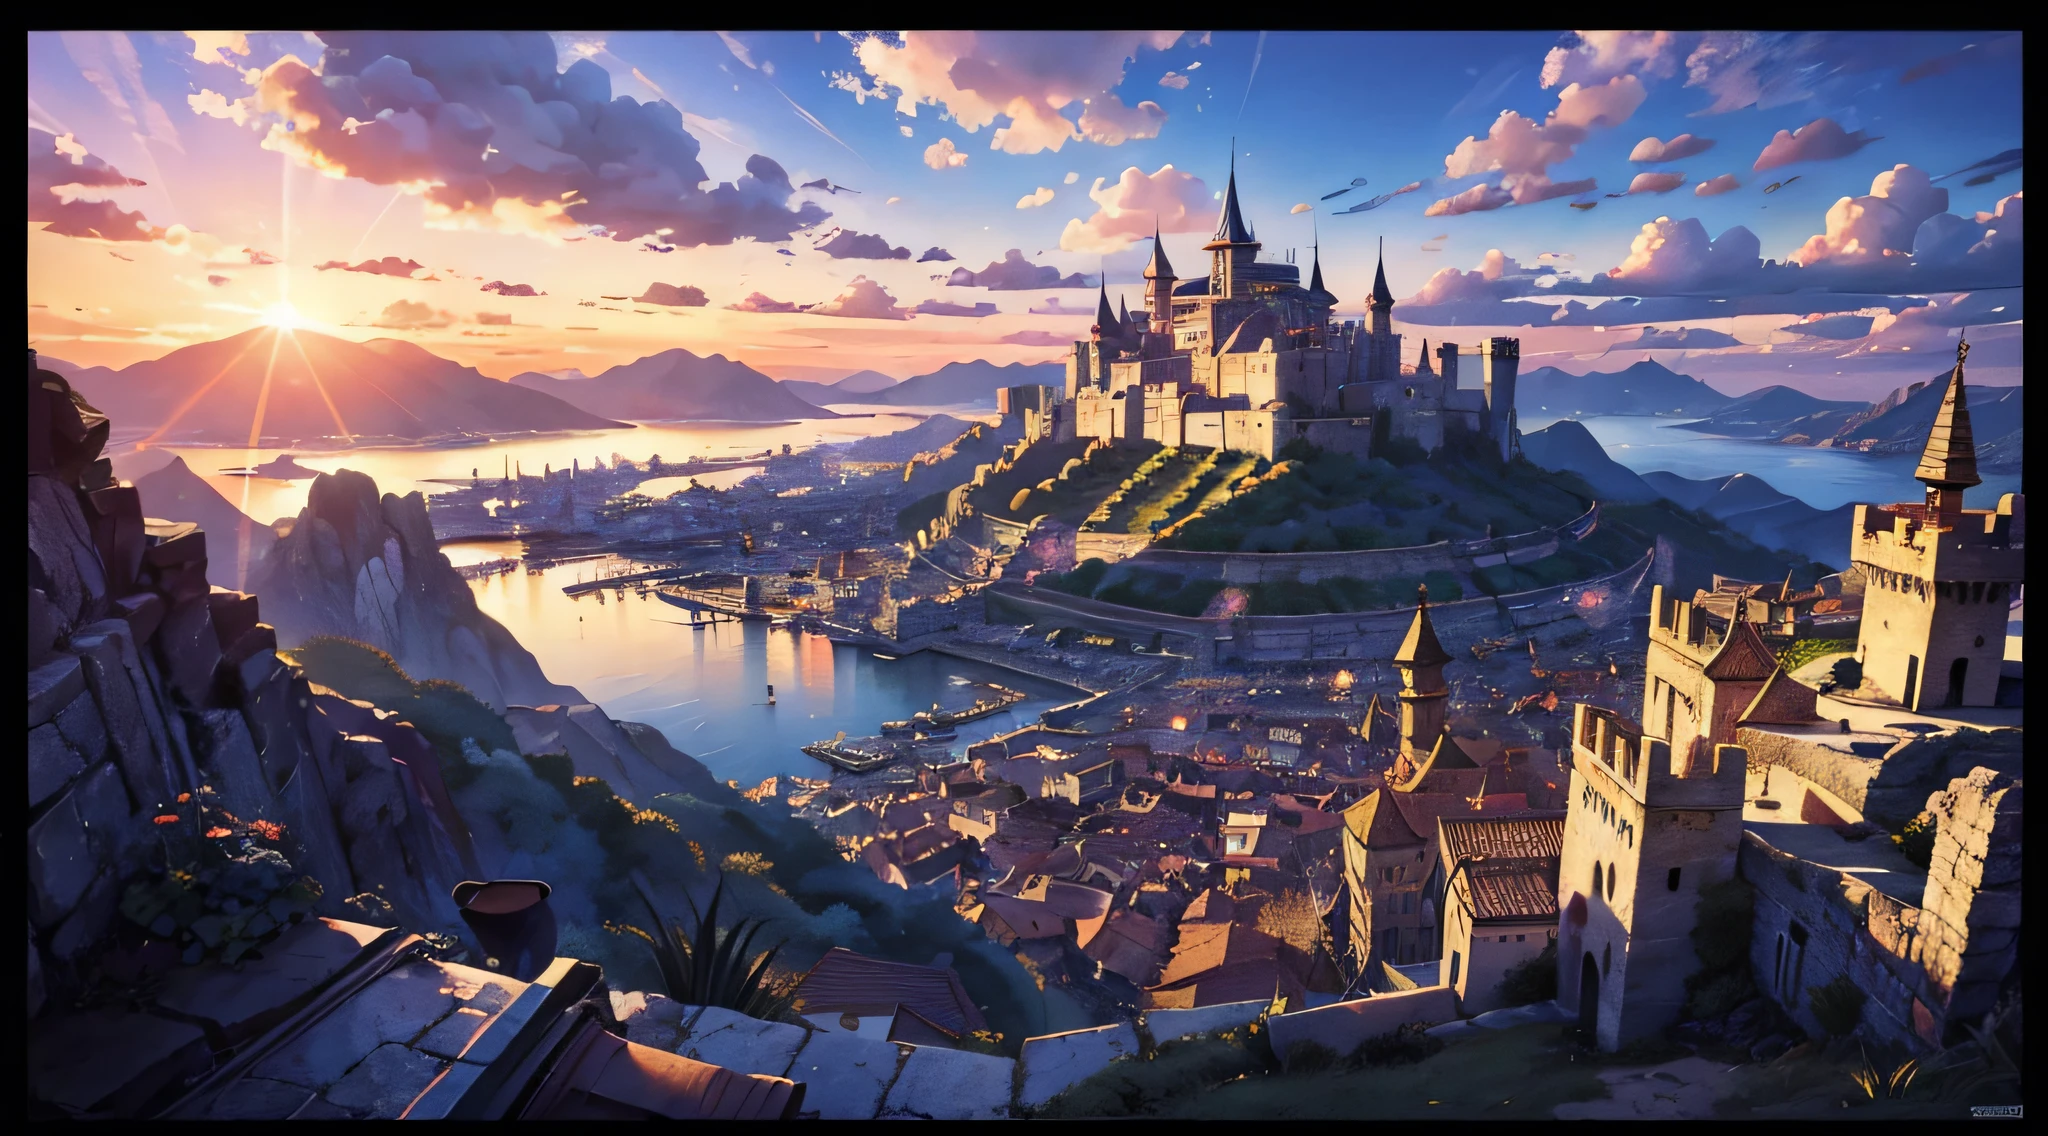 "The kingdom overlooking a village from a scenic hill with the vibrant sun in the sky, beautifully illustrated manga panel with intricate manga drawing and shading."